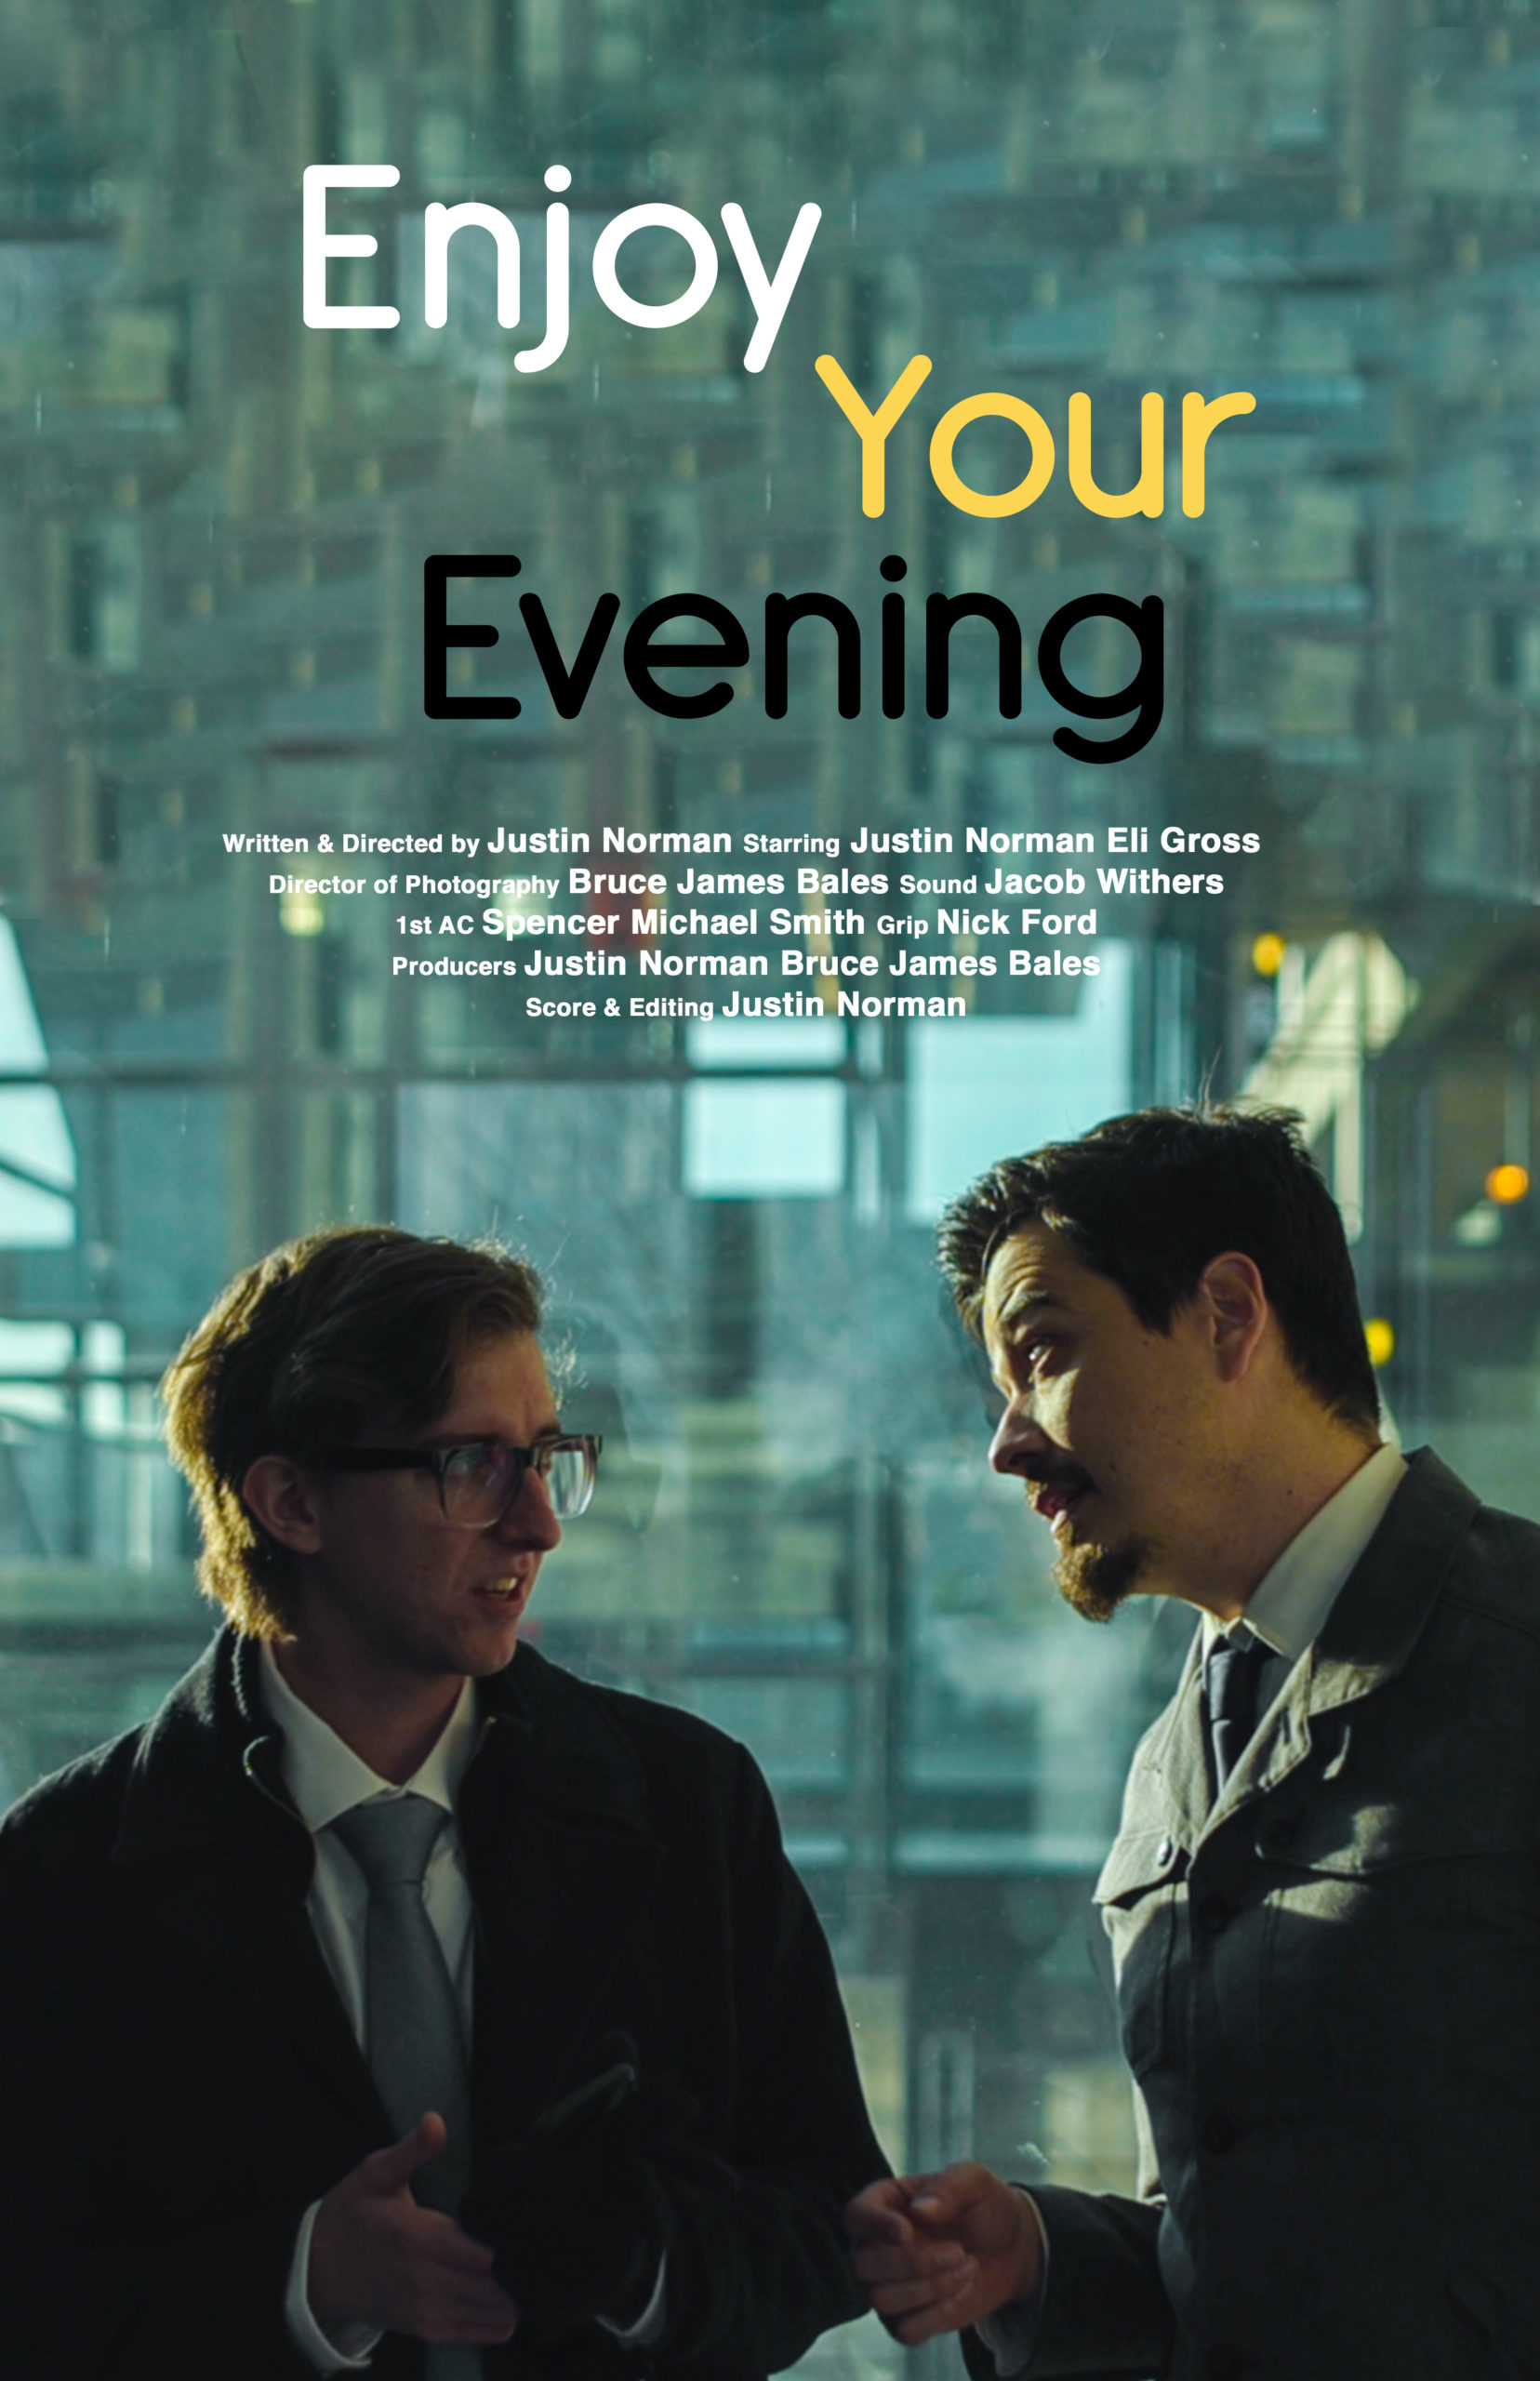 film poster design in Des Moines, Iowa for Enjoy Your Evening